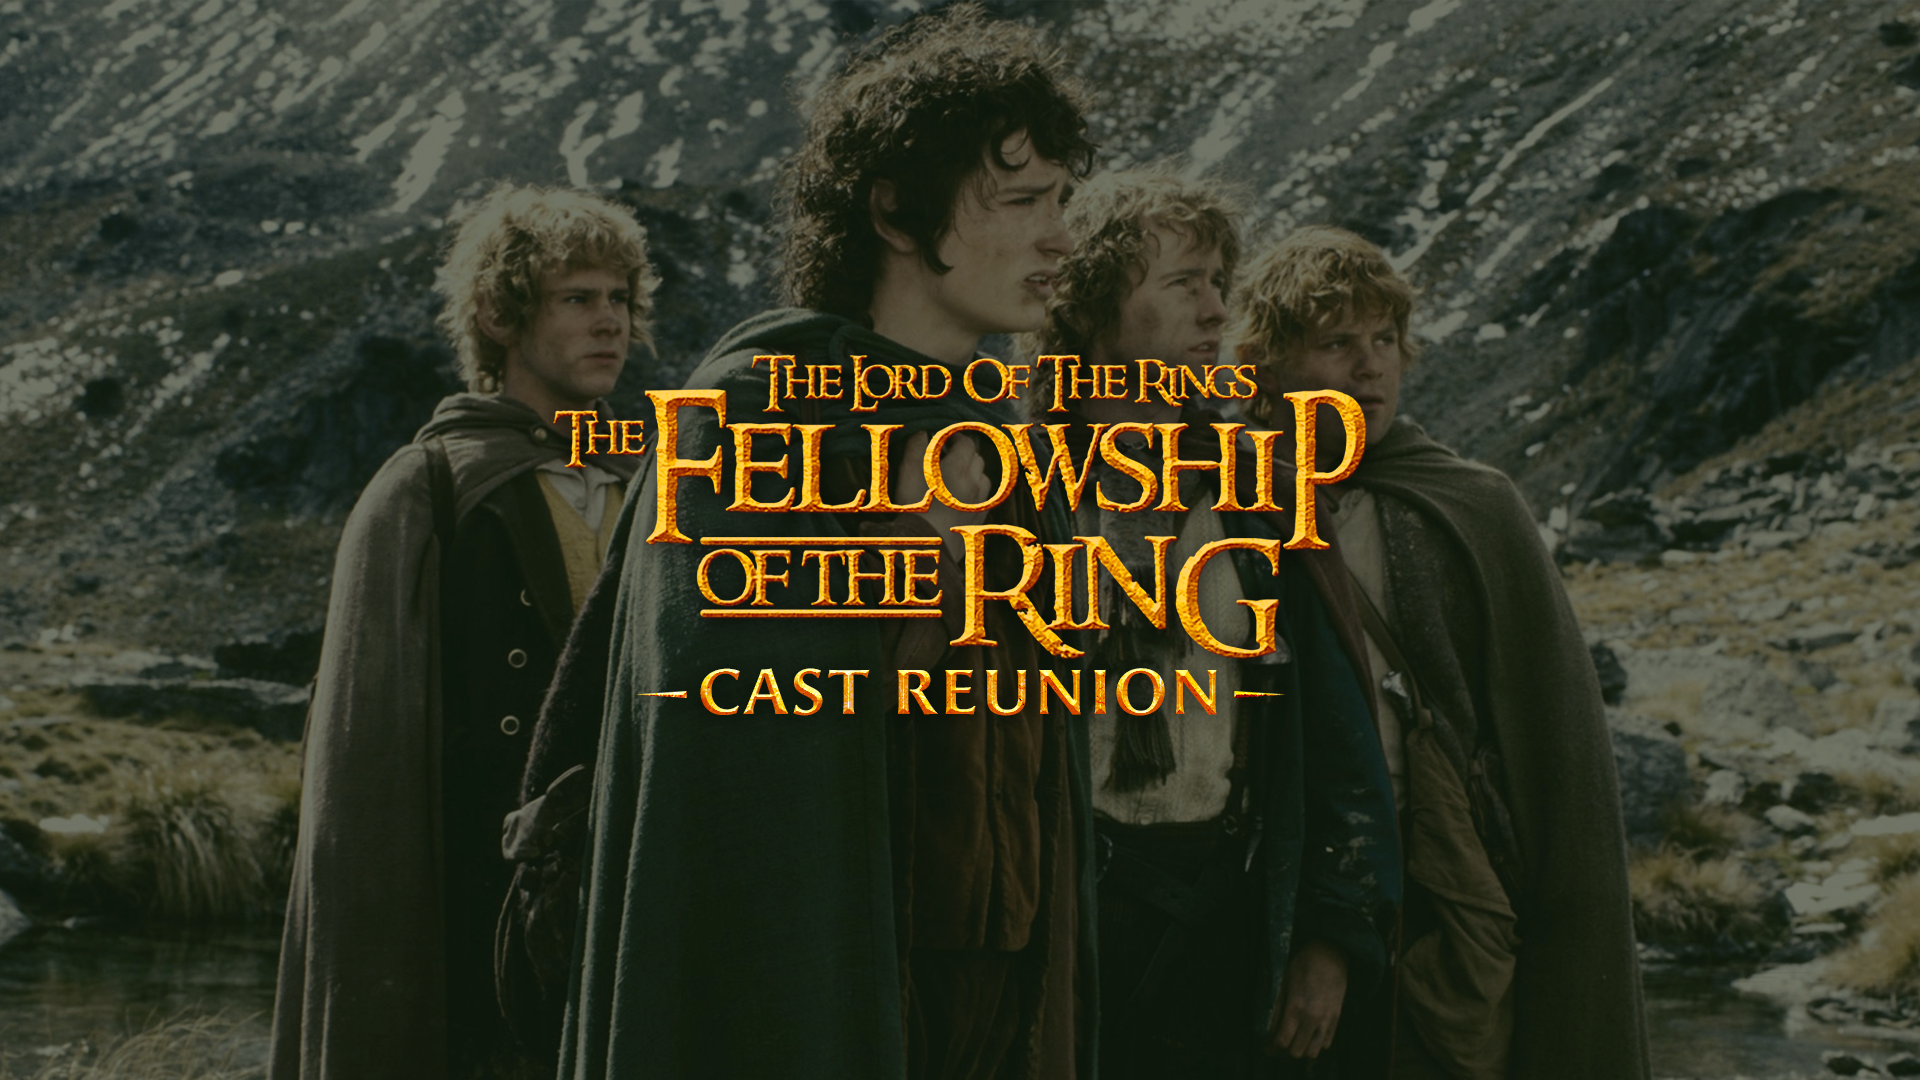 Watch Stephen Colbert Reunite With the Lord of the Rings Cast in These  Exclusive Videos